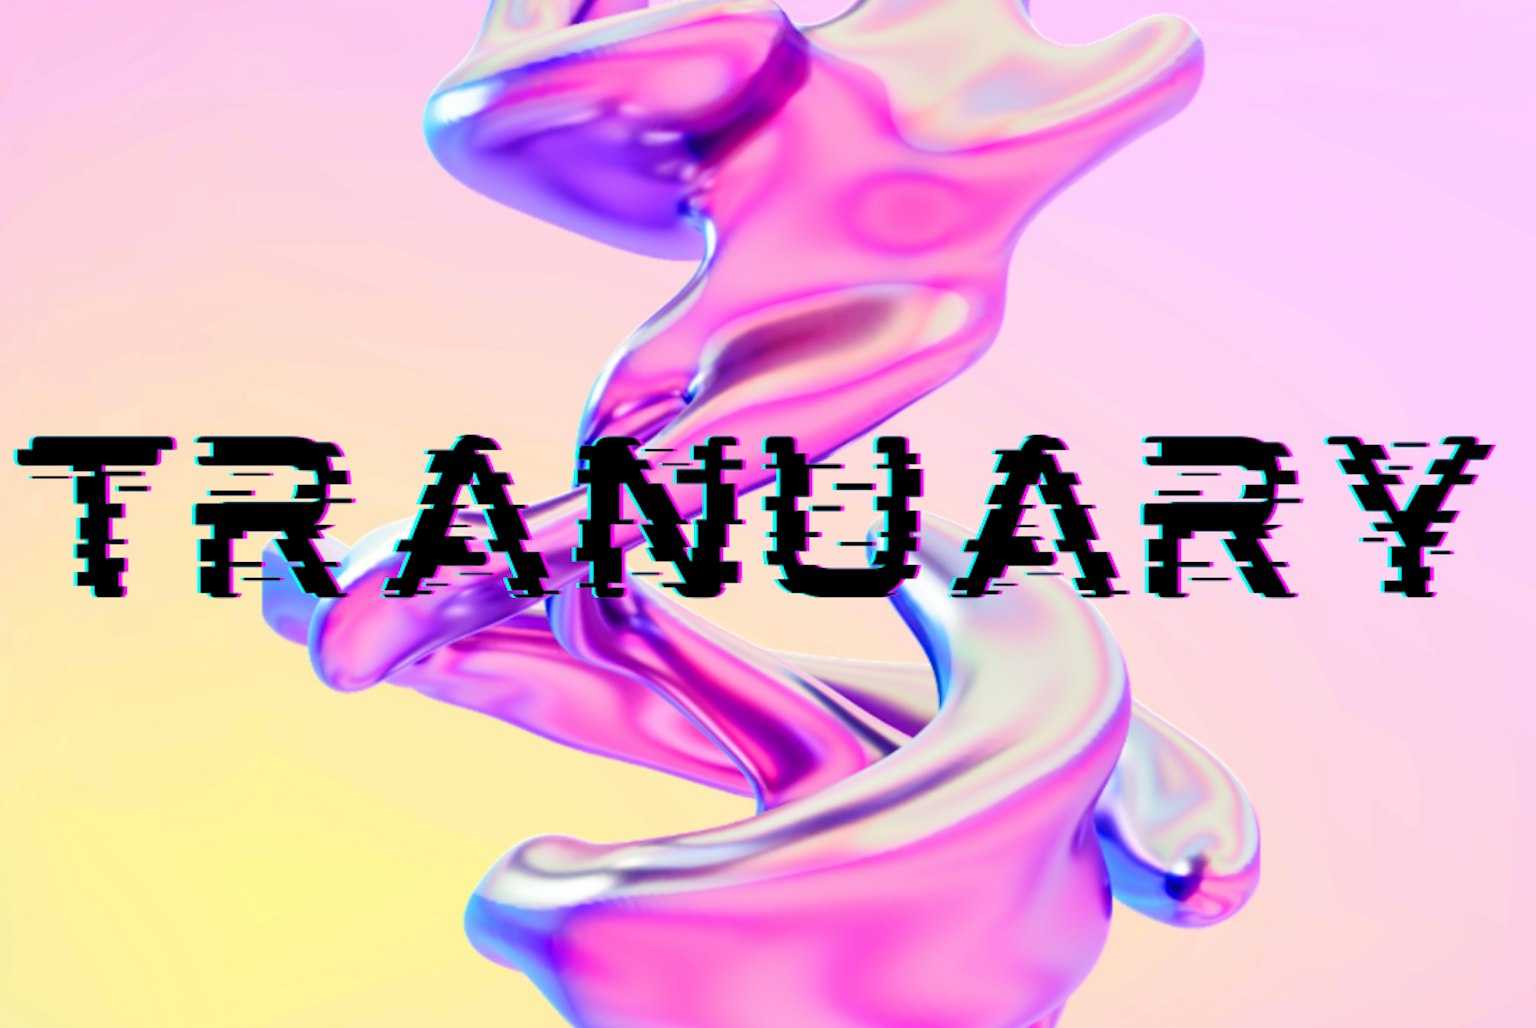 The TRANUARY logo on a pink and yellow background with a colourful 3D liquid graphic in the centre.